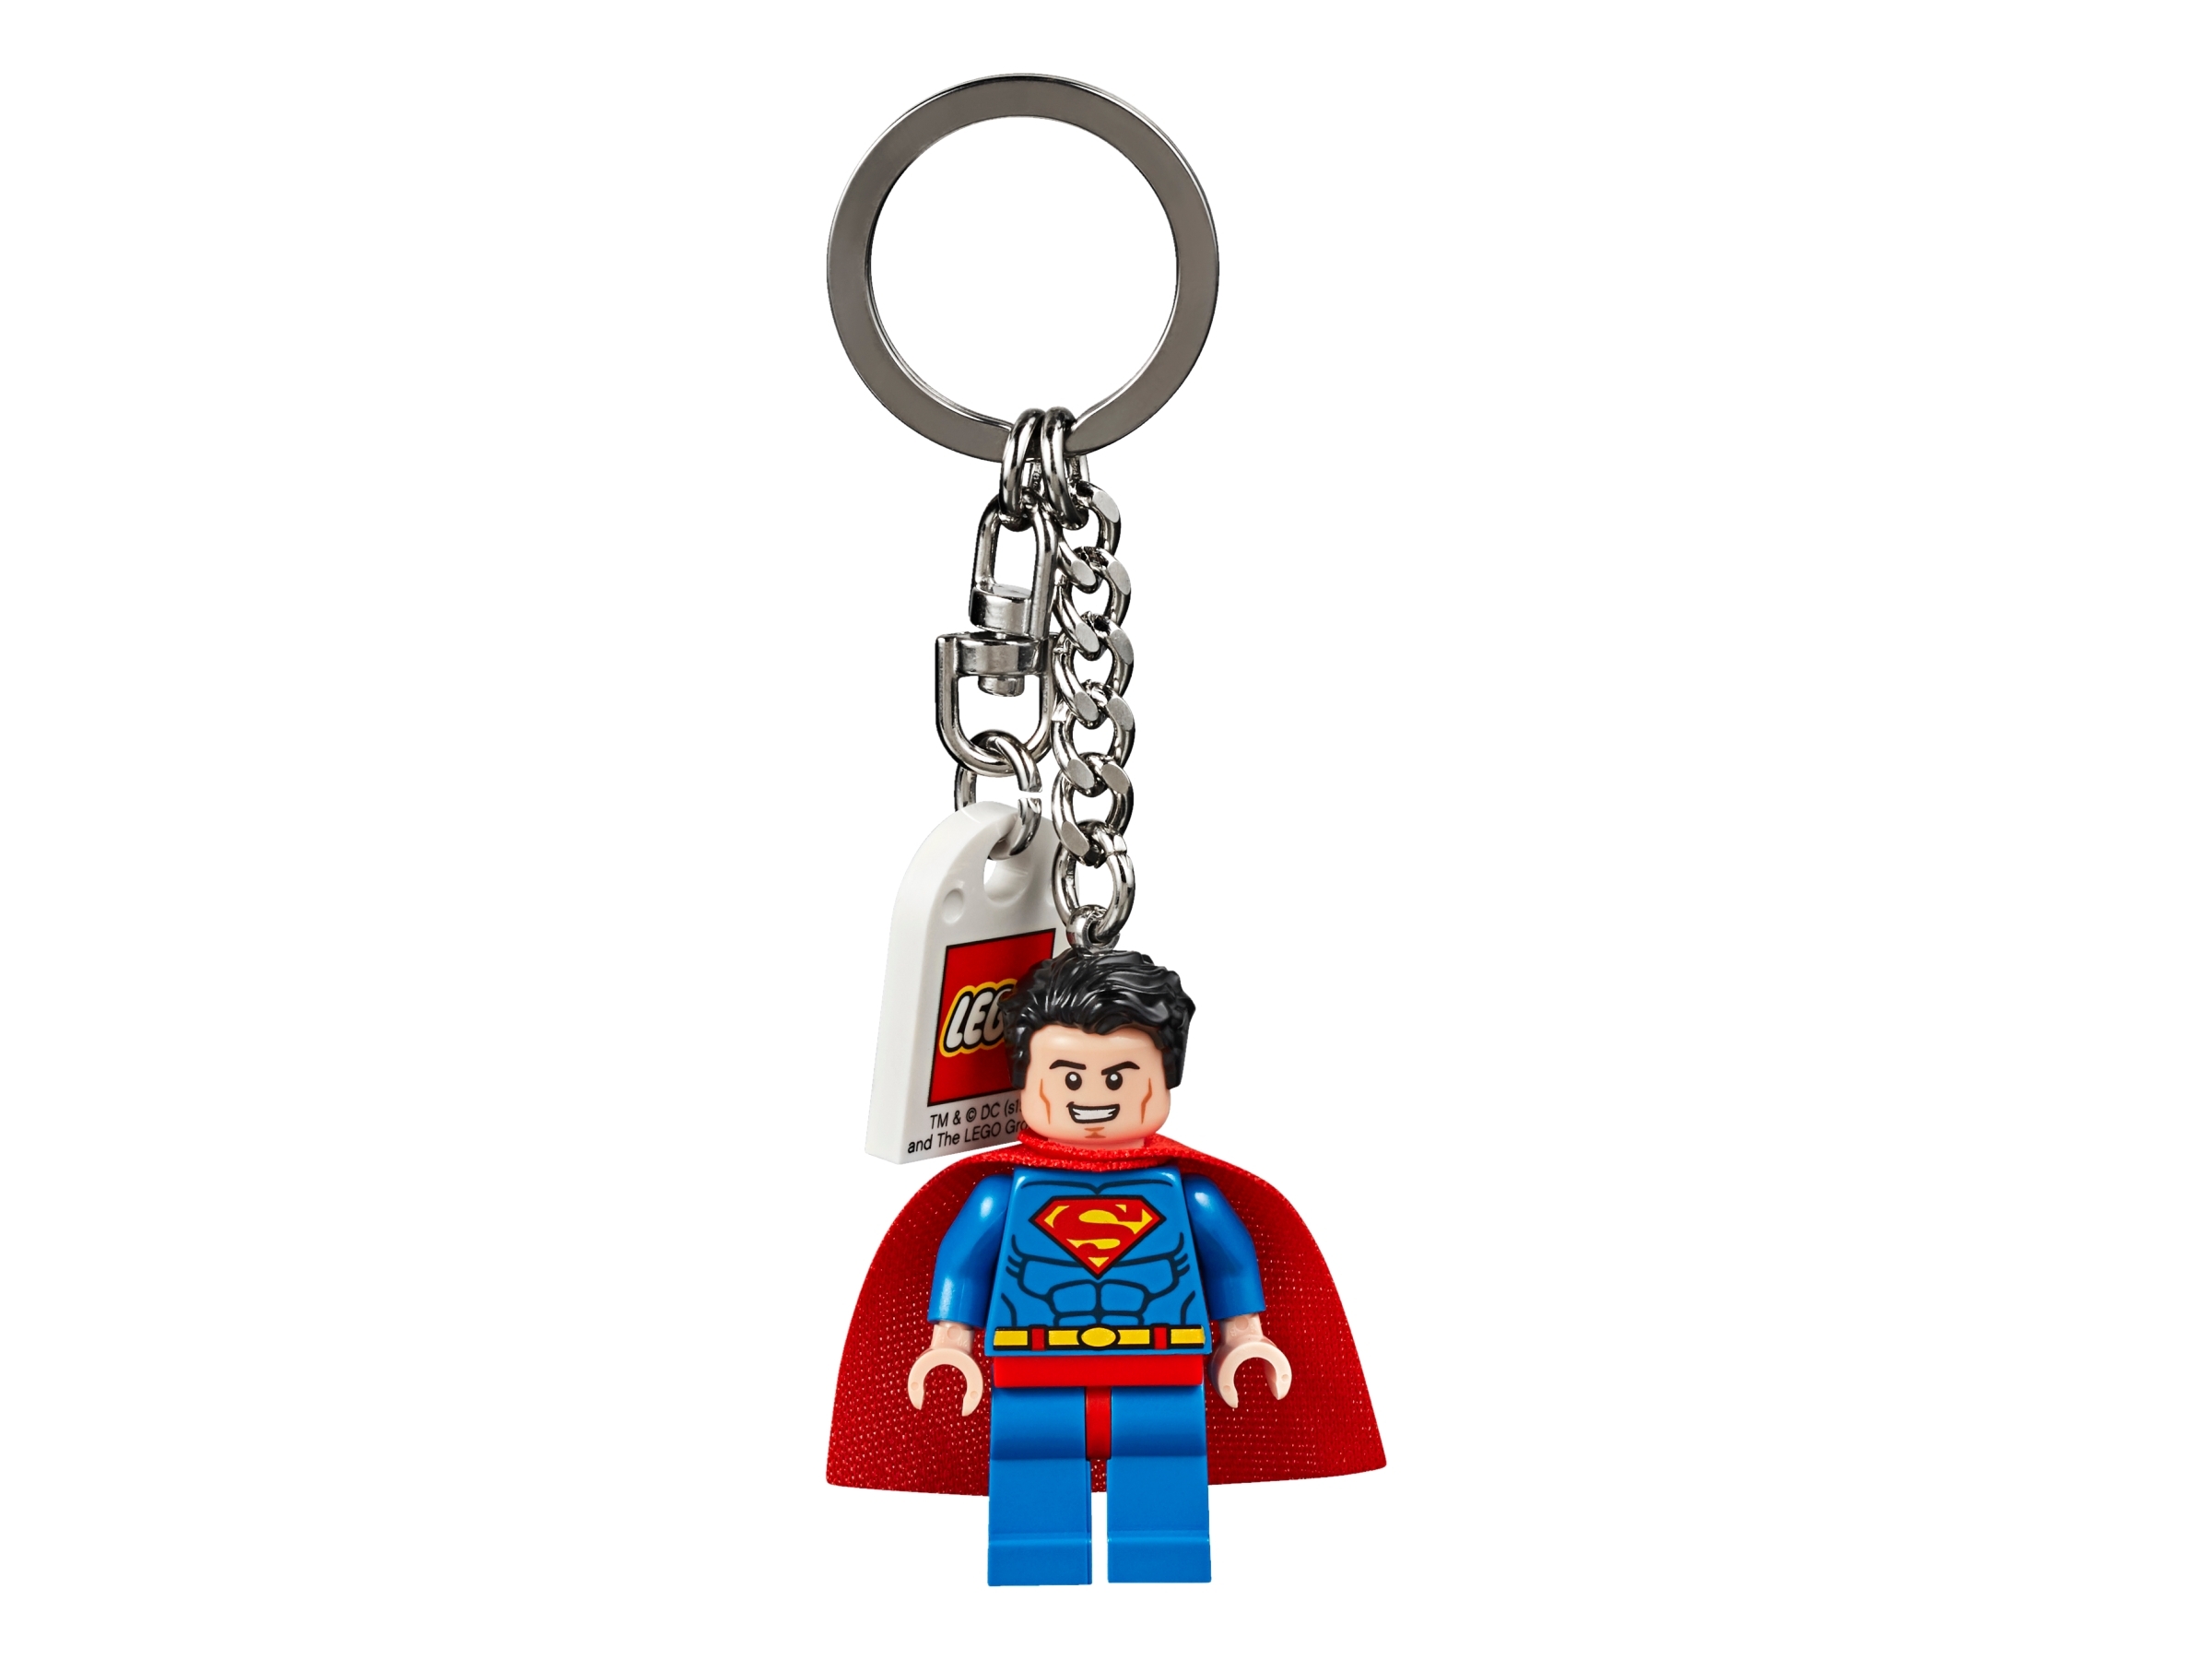 Details about   Wonder Woman Super Heroes Keyring Alloy Keychain Key Chain Ring Justice League 